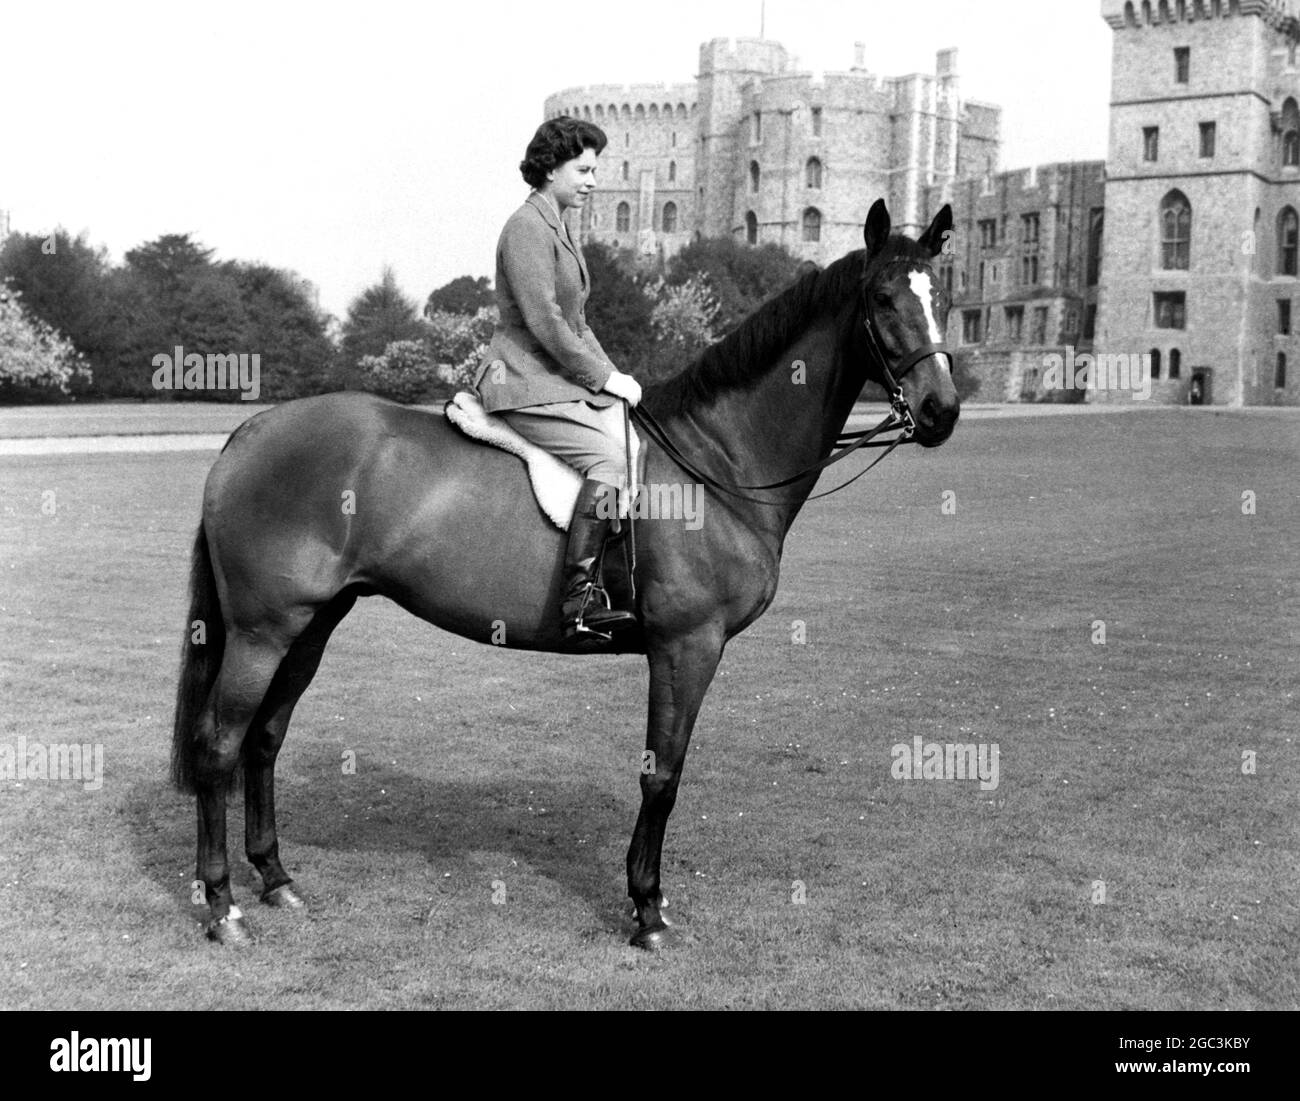 HM Queen Elizabeth II on Sultan with Windsor Castle in the background . The bay thoroughbred was given to the Queen by the President of Pakistan in 1959 18th May 1961 Stock Photo